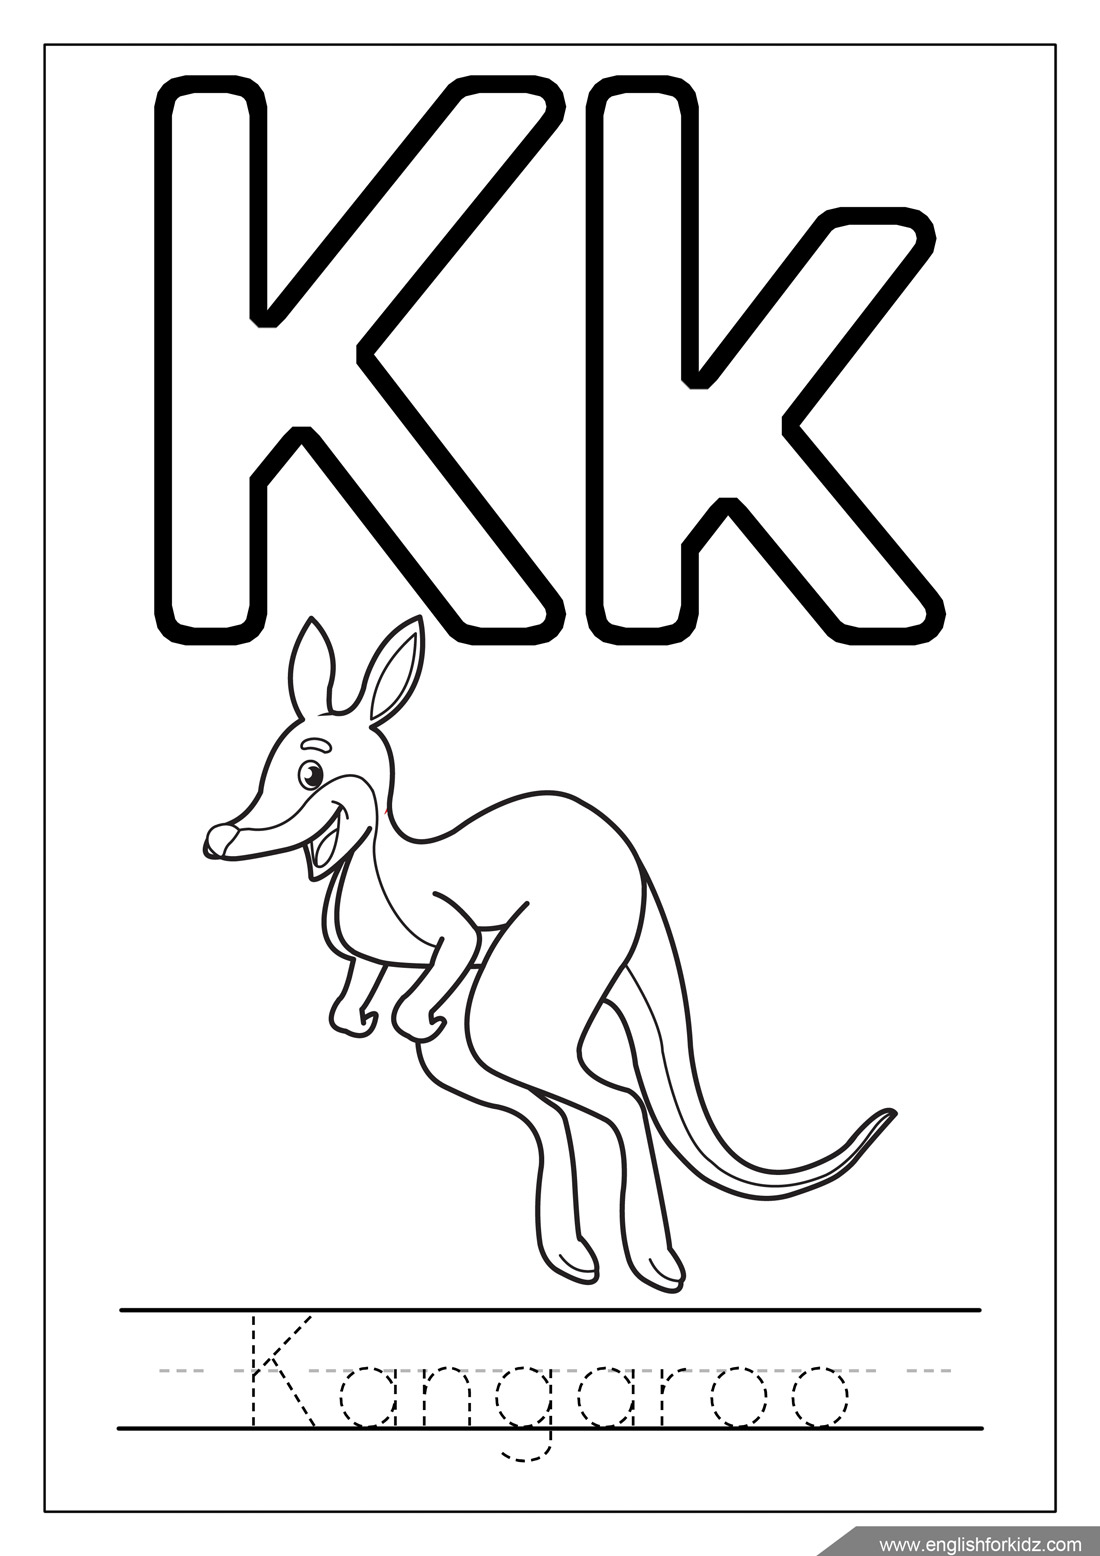 English for kids step by step alphabet coloring pages letters k